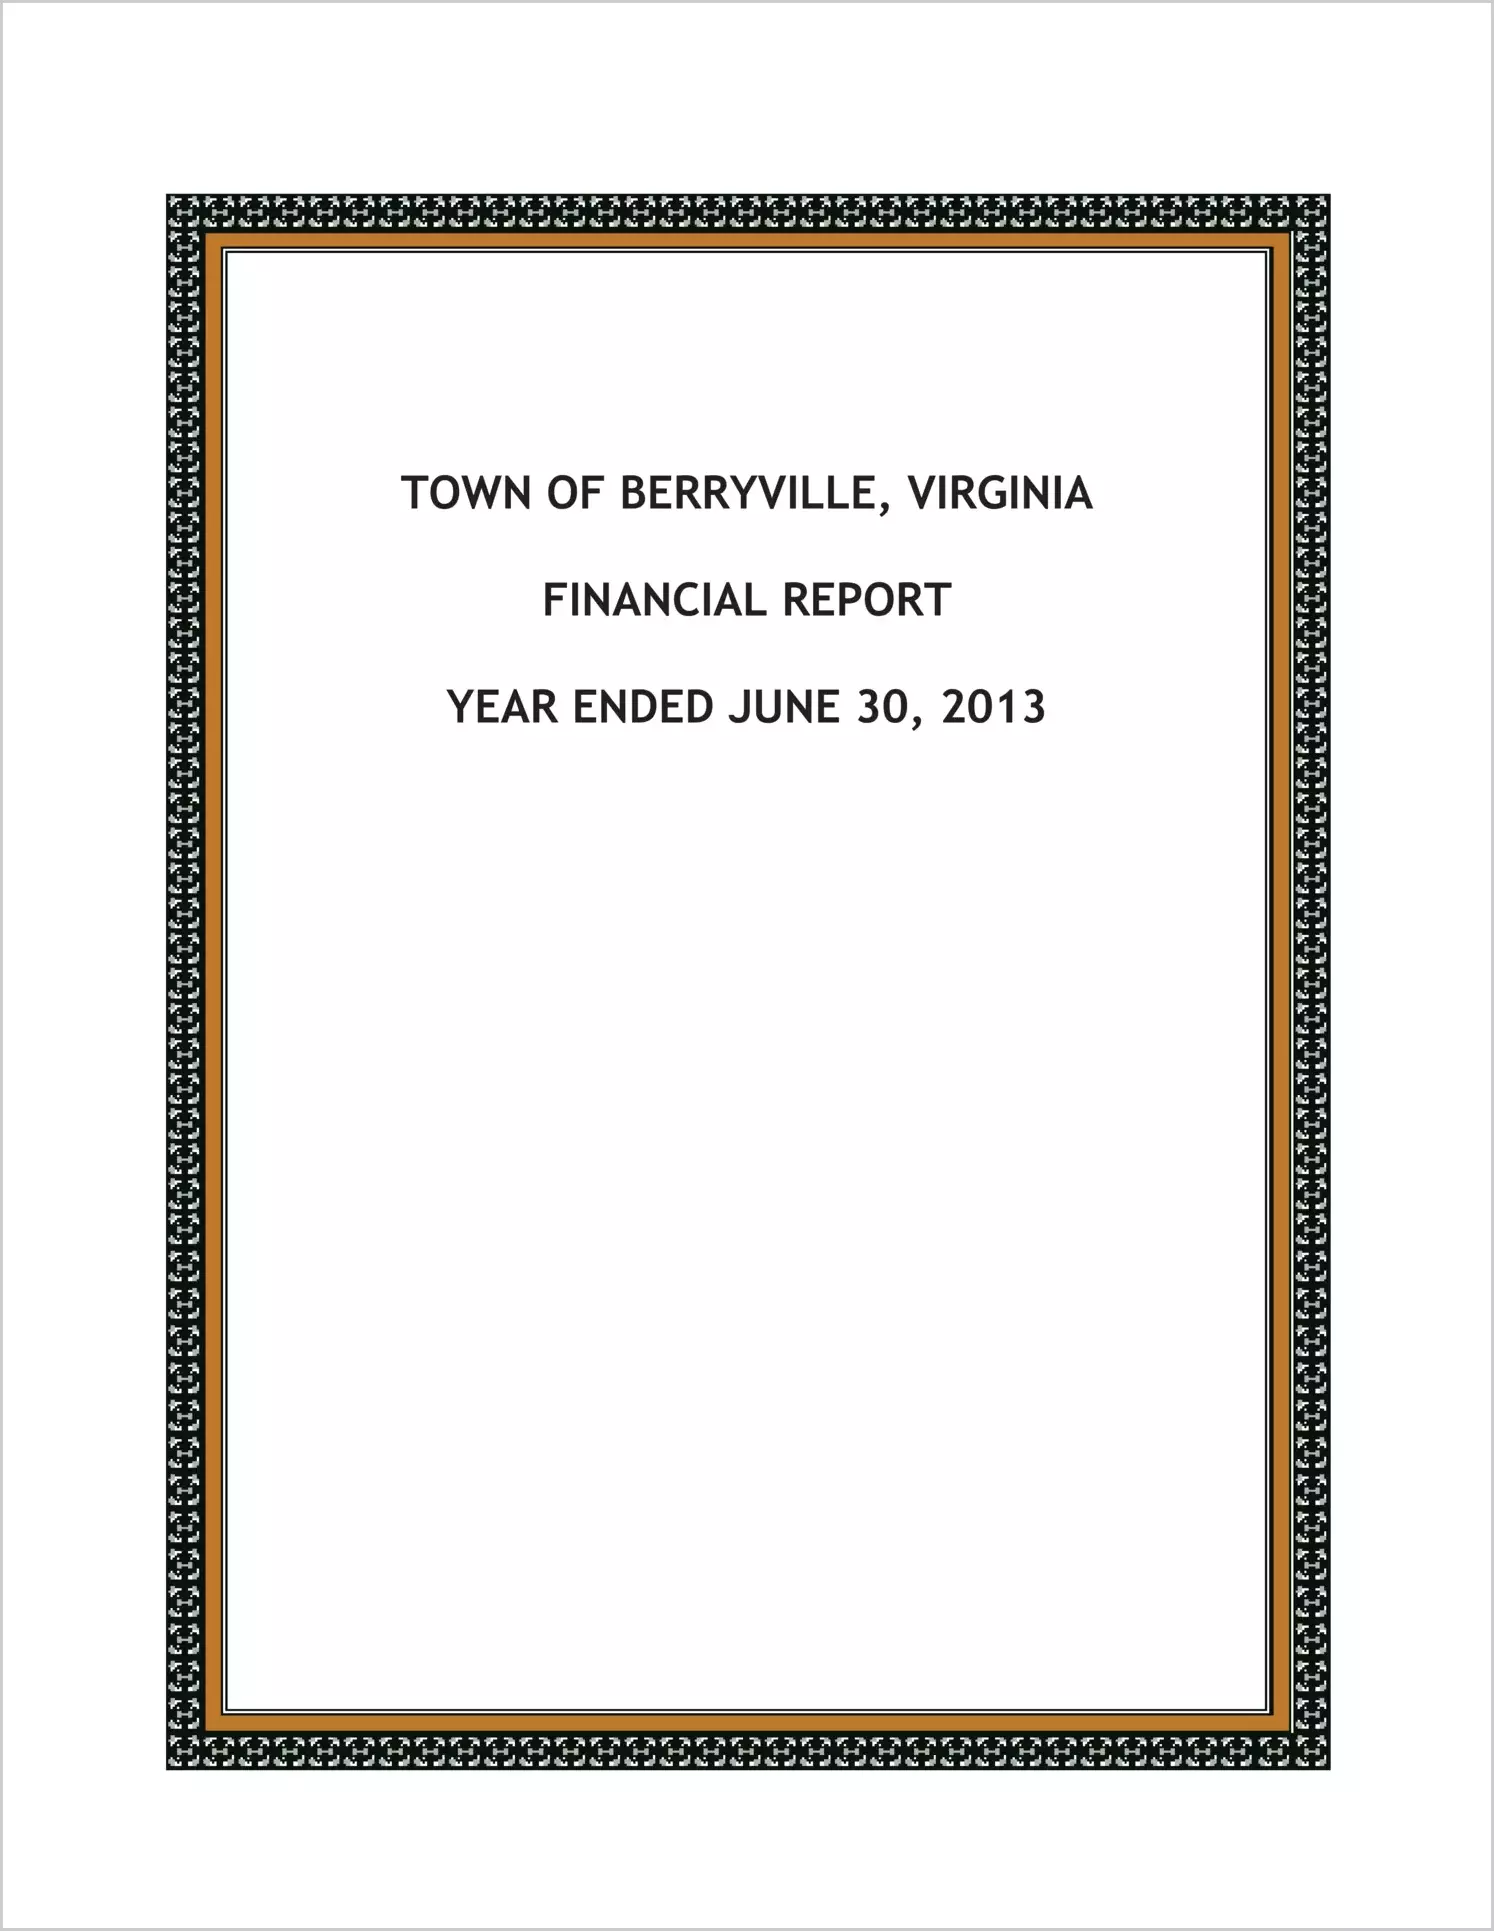 2013 Annual Financial Report for Town of Berryville